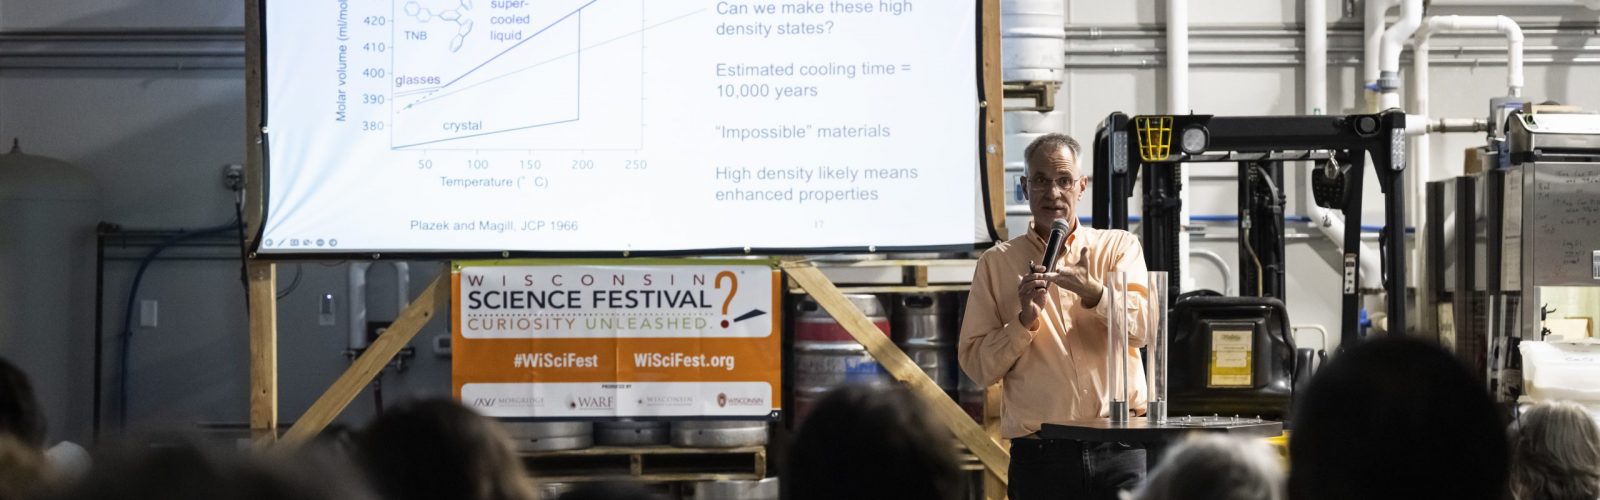 Speaker Mark Ediger stands in front of an elevated projector screen and a banner that reads "Wisconsin Science Festival"